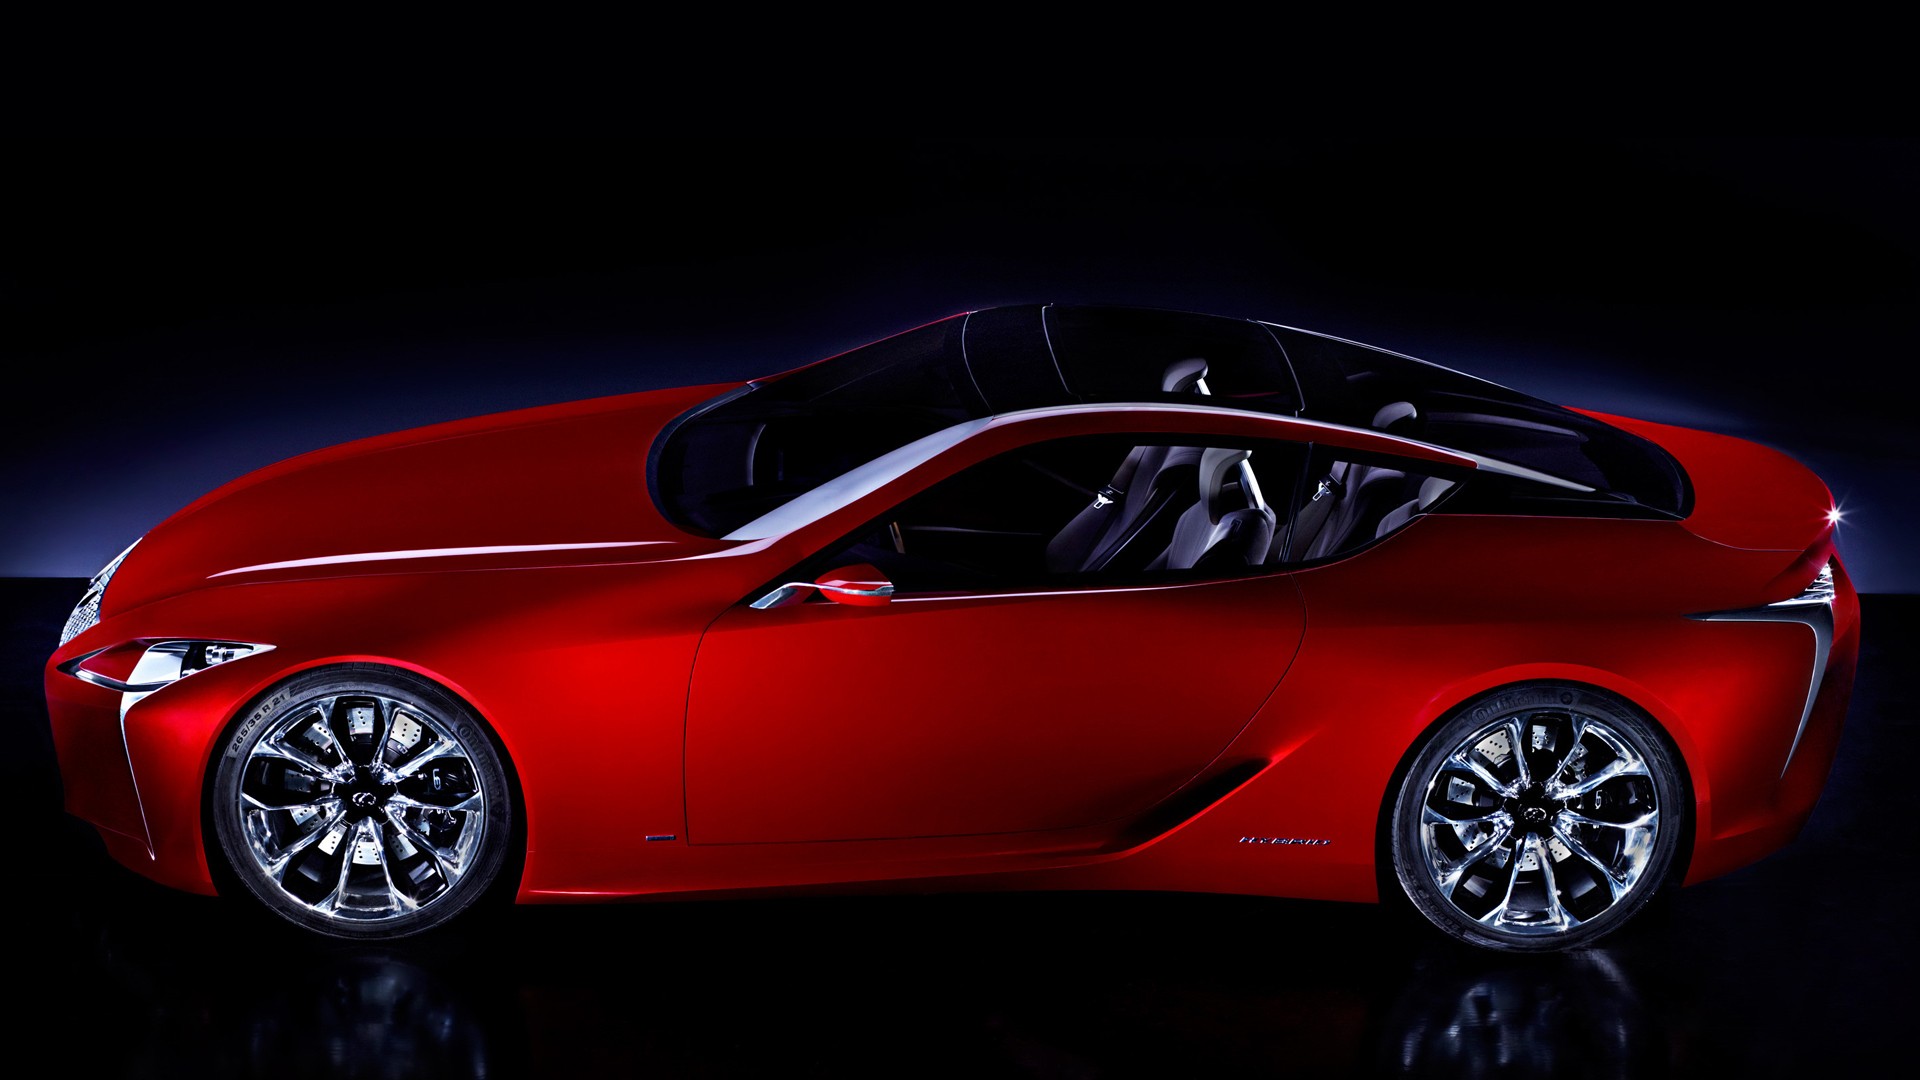 General 1920x1080 Lexus car vehicle red cars side view Lexus LF-LC Japanese cars